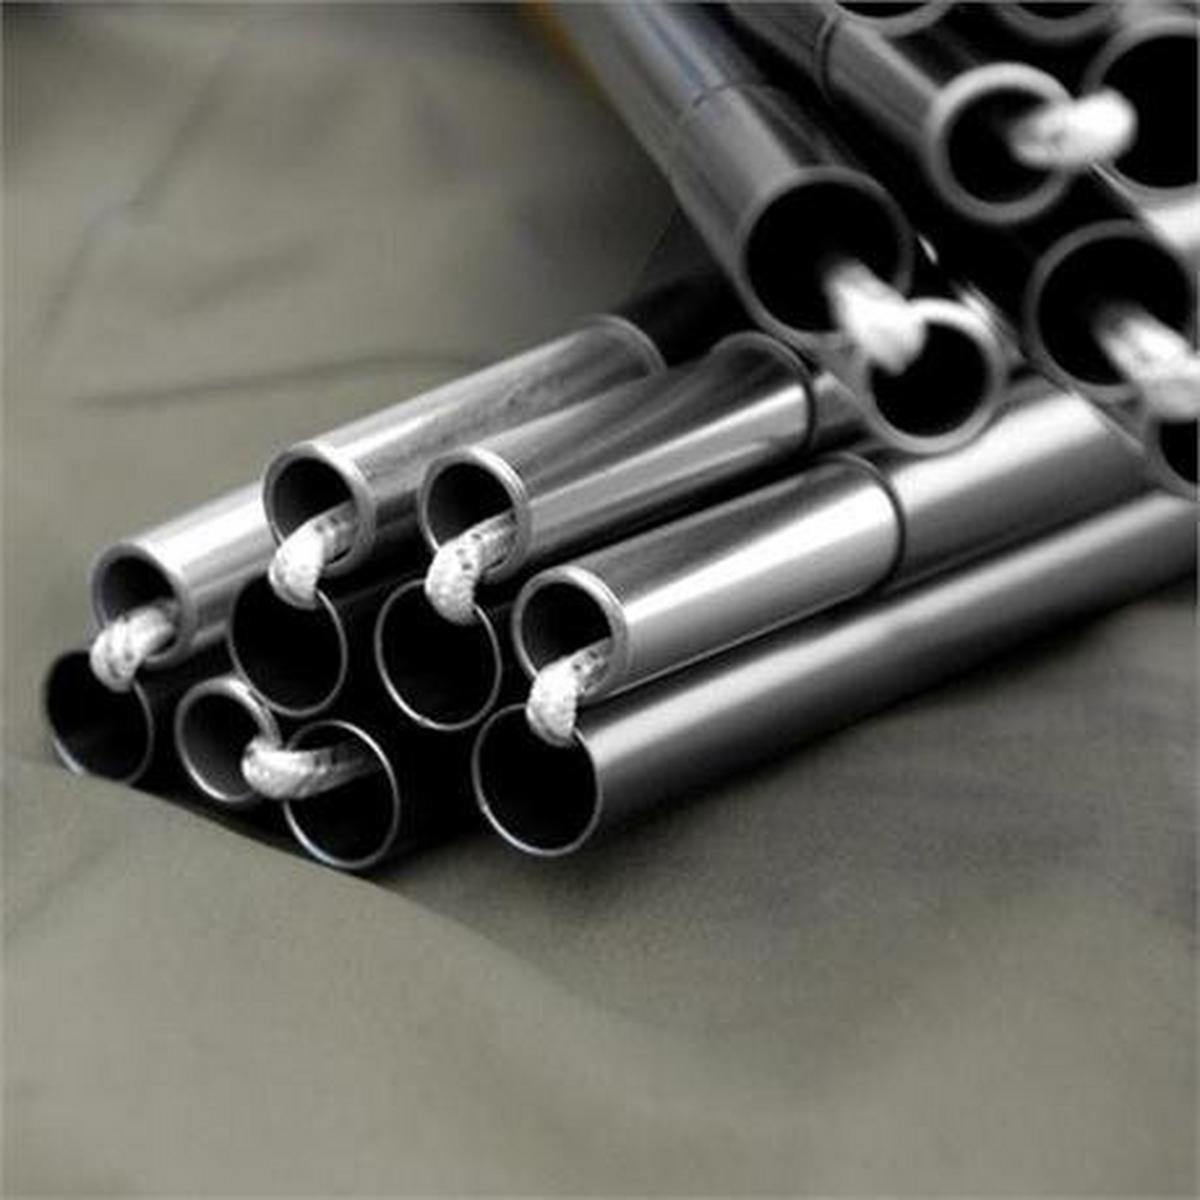 Miscellaneous Tent Spare/Accessory: Alloy Pole Section 8.5mm x 40cm Insert Male